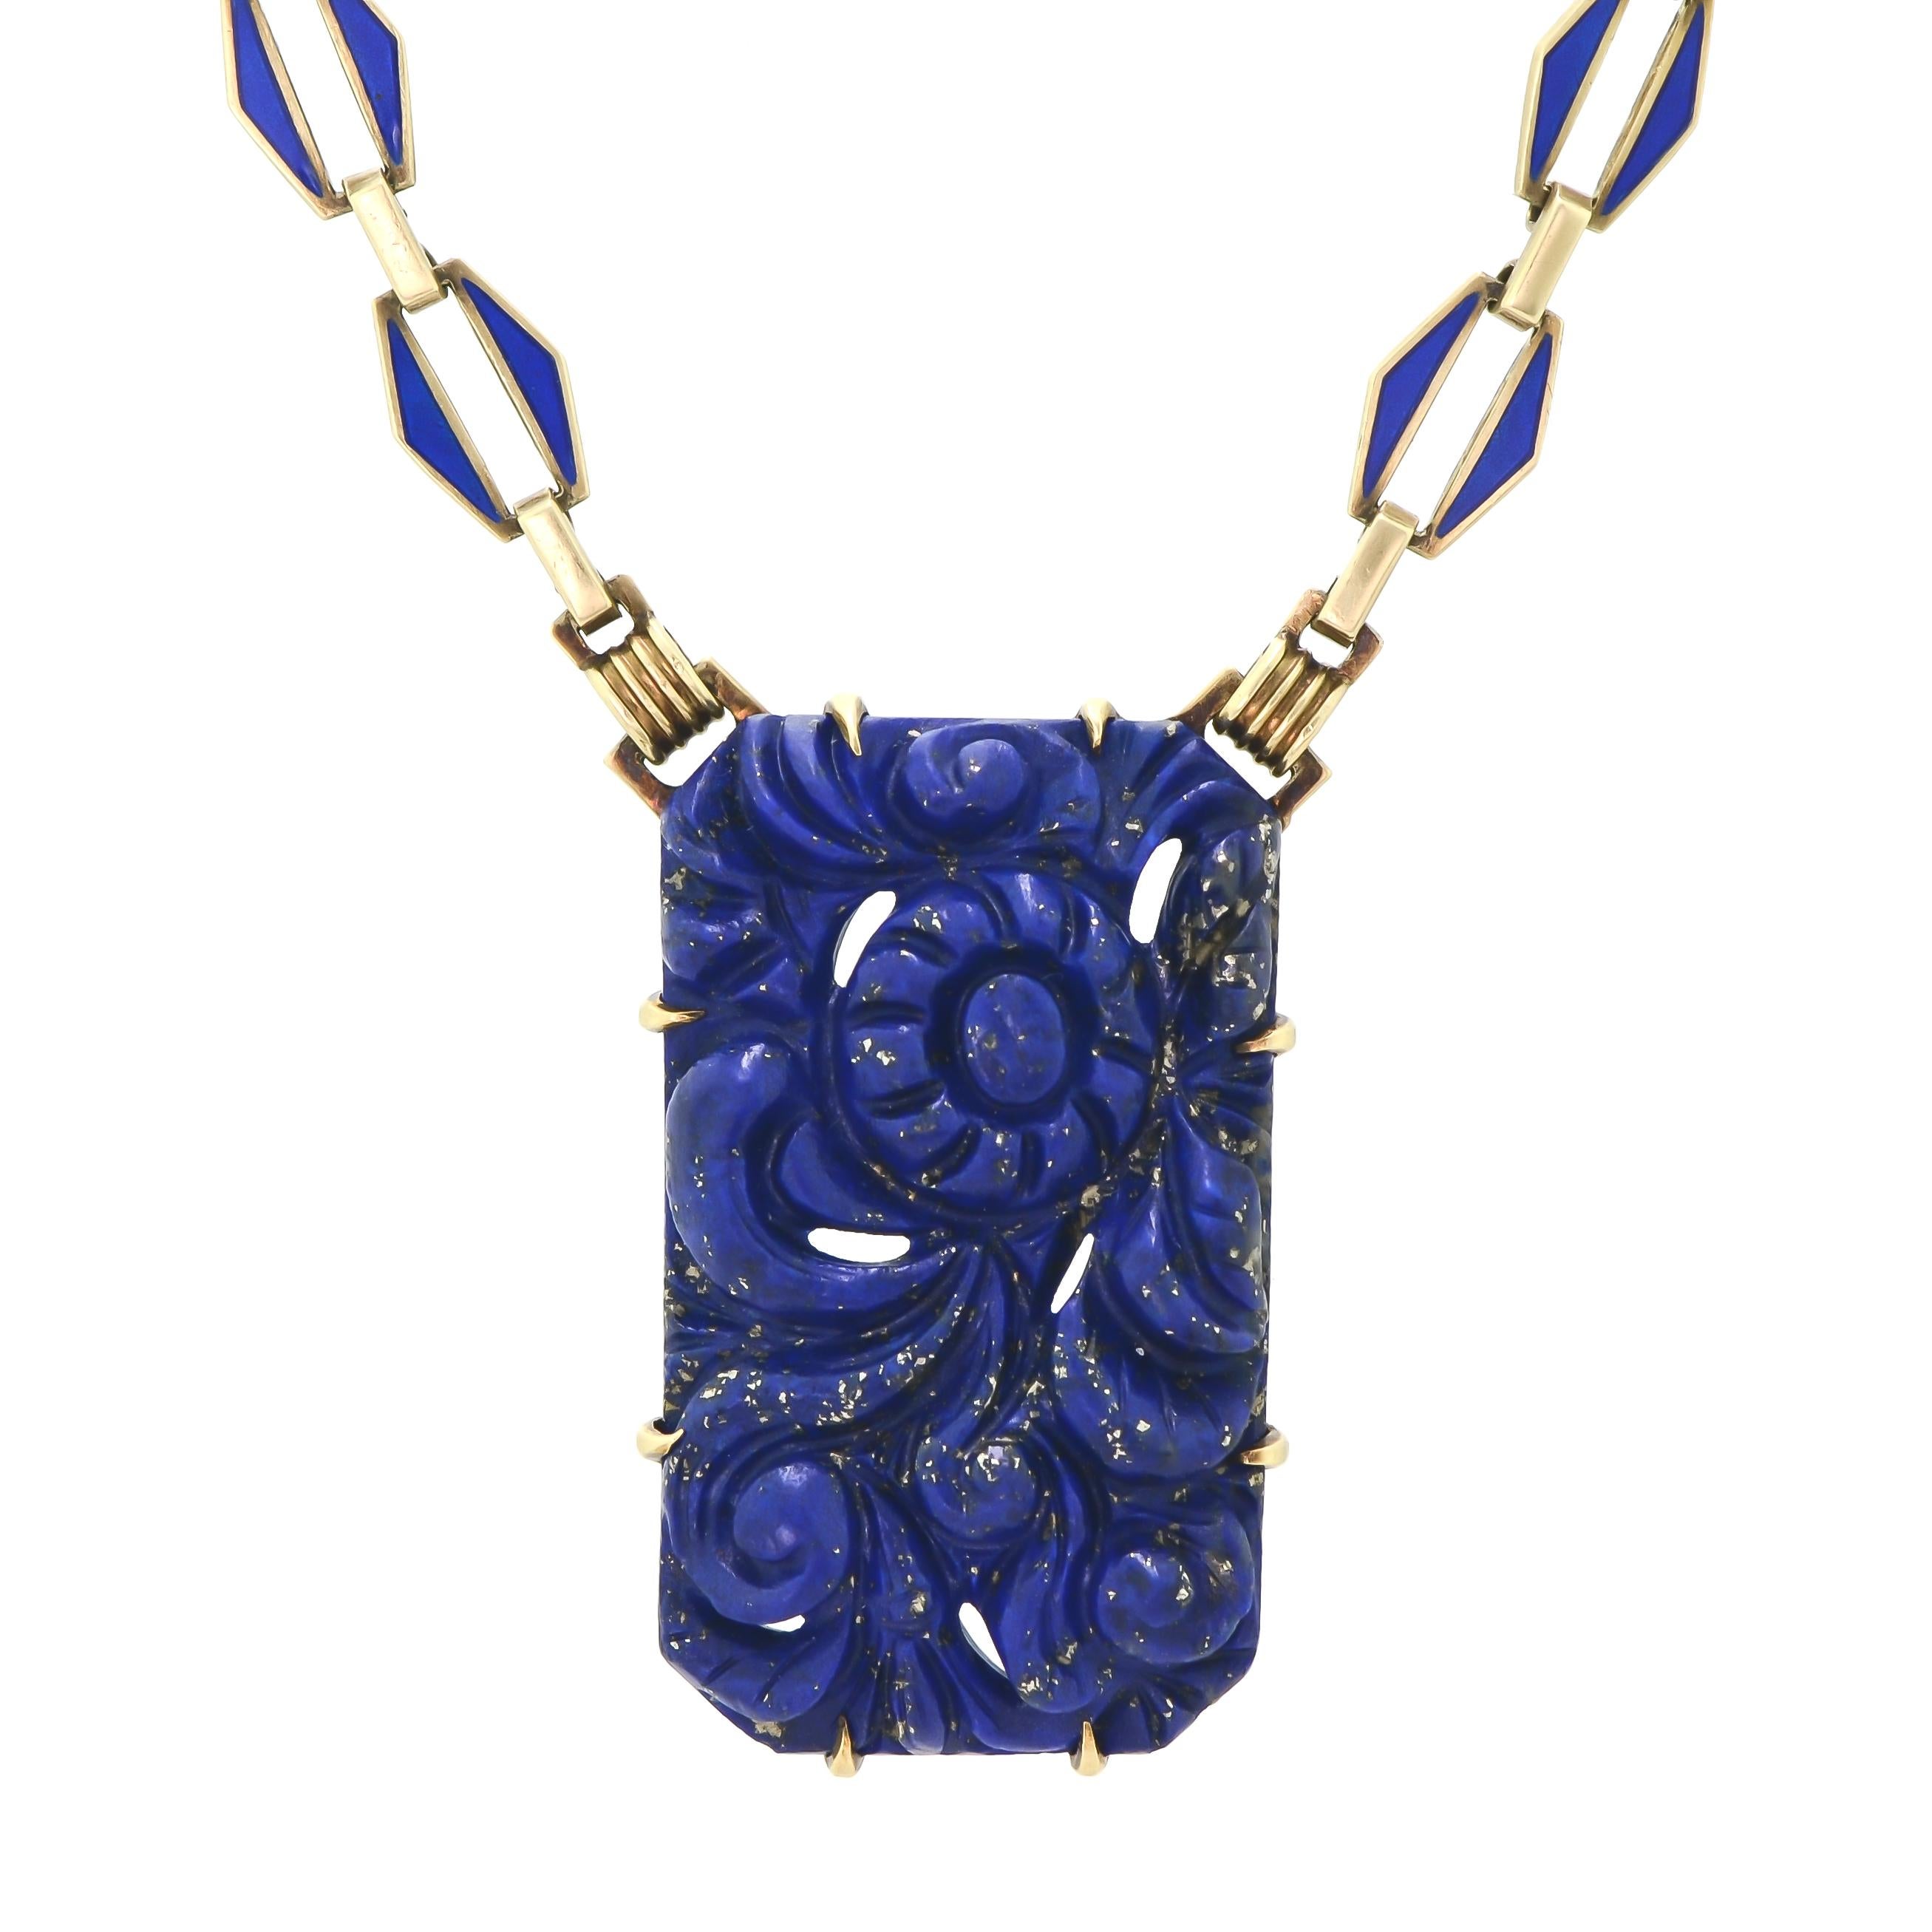 Sensational Art Deco lapis and enamel necklace containing a total of five (5) vivid royal blue Lapis Lazuli plaques. Each plaque is carved with a graceful foliate design joined by classic Art Deco blue enamel links of fluted 14K yellow gold in this